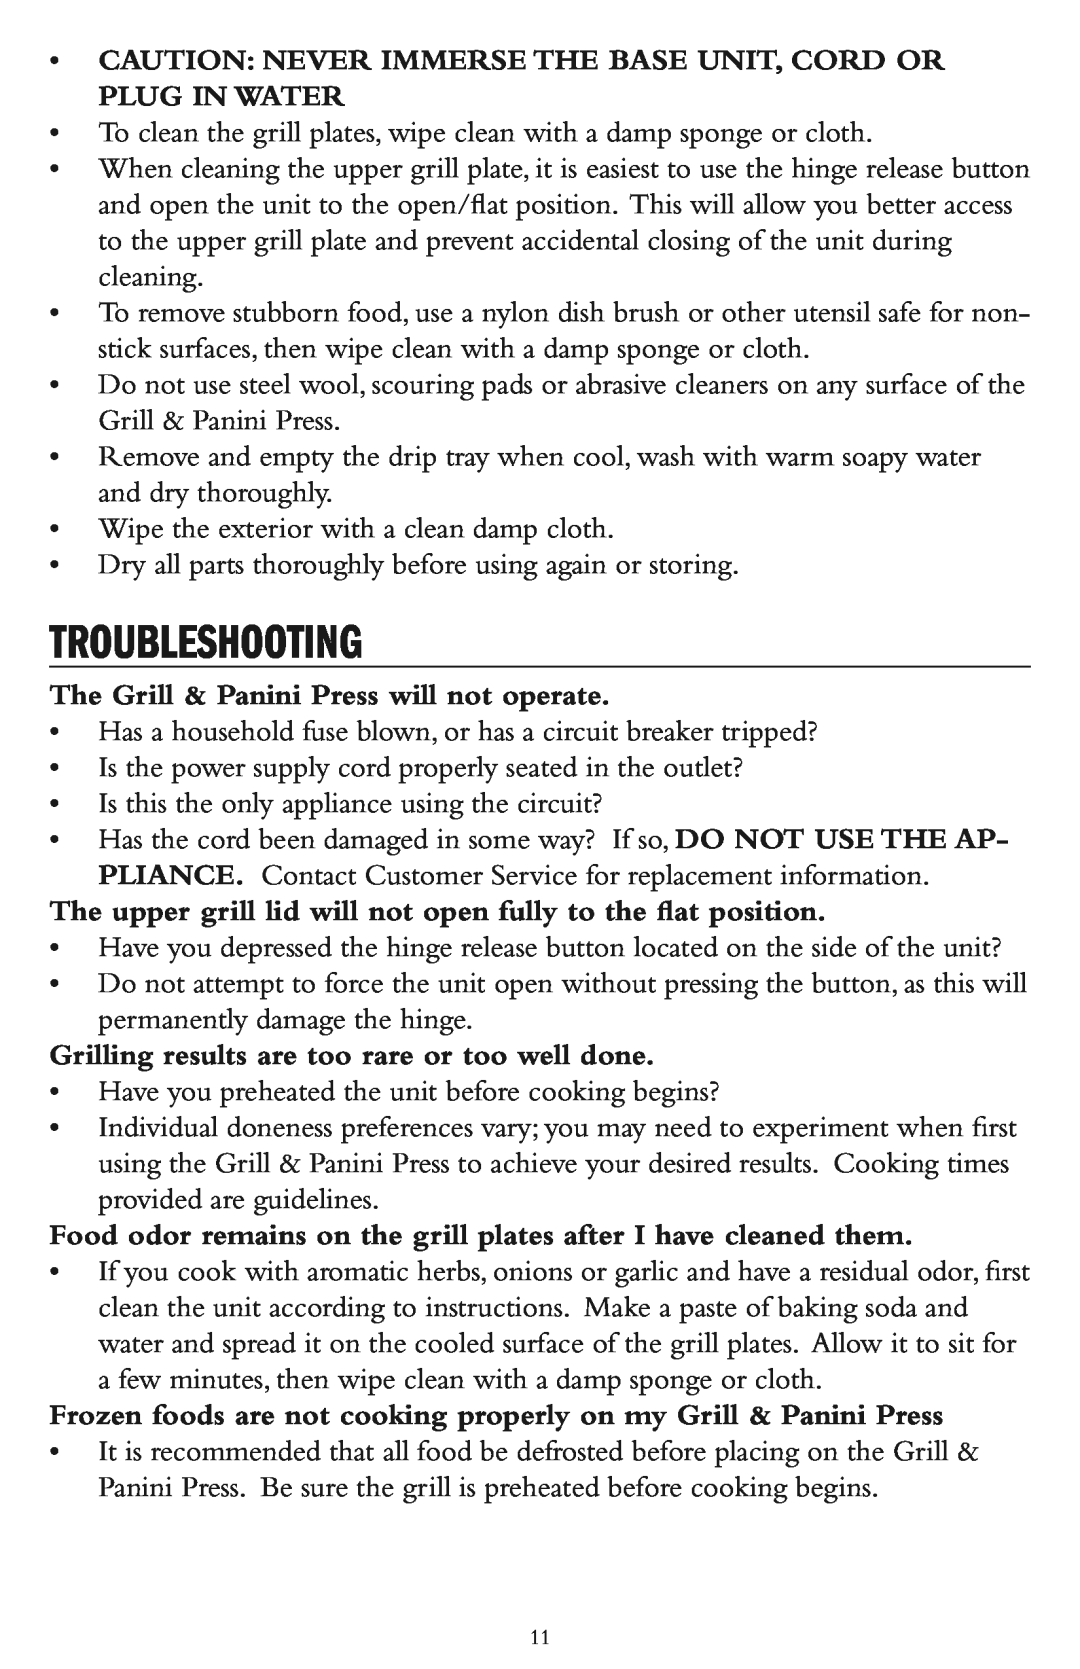 Taylor AG-1300-BL instruction manual Troubleshooting, Caution Never Immerse The Base Unit,Cord Or Plug In Water 